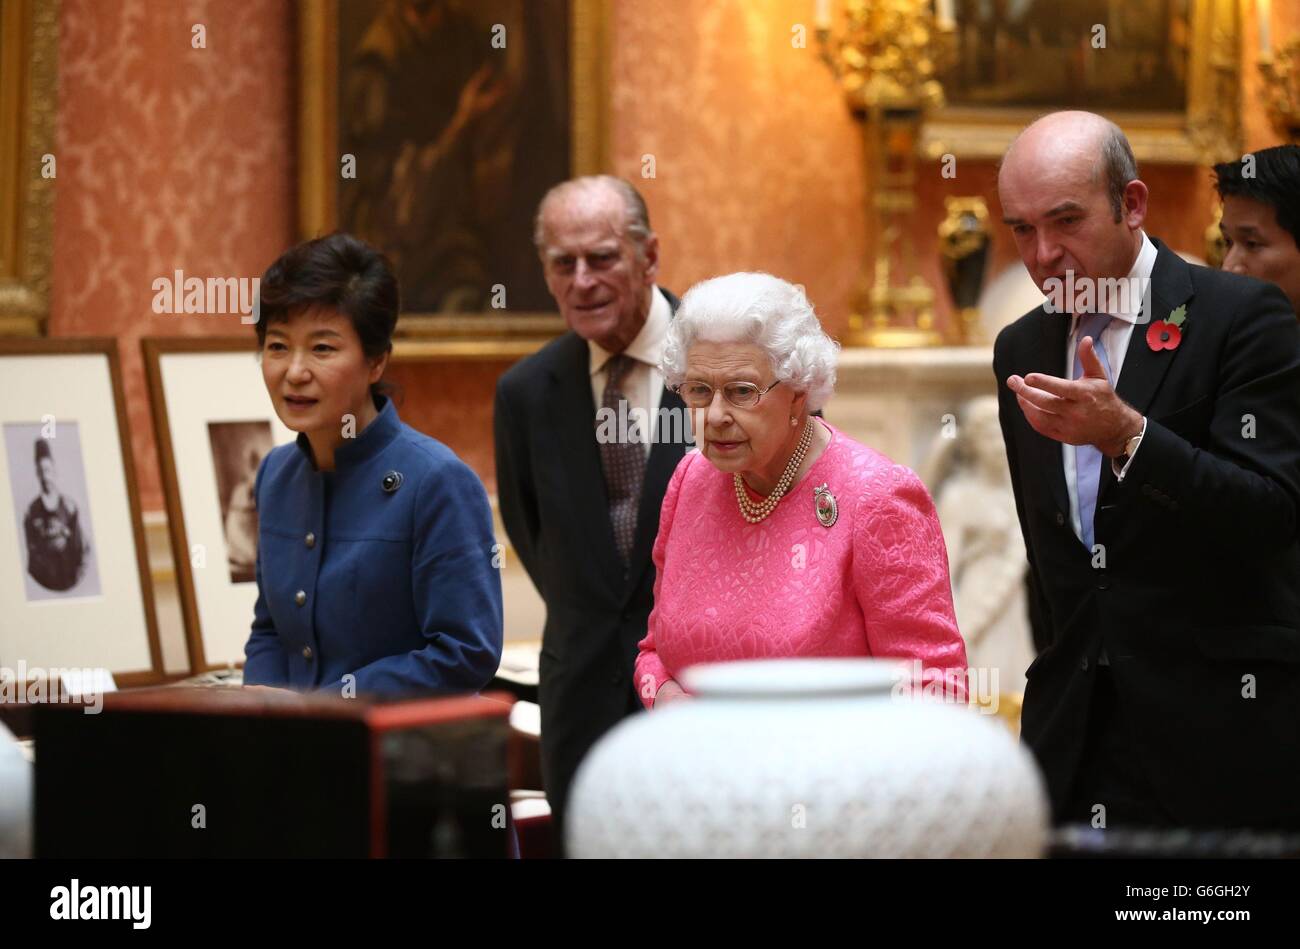 The President of the Republic of Korea Park Geun-Hye (left), the Duke of Edinburgh (second left) and Queen Elizabeth II (second right) arrive to look at an exhibition of Korean related items from the Royal Collection and Royal Archives in the Picture Gallery of Buckingham Palace in London, England. The President of the Republic of Korea Park Geun-Hye is on a State Visit to the United Kingdom and during the trip she will attend a state banquet and visit Downing Street. Stock Photo